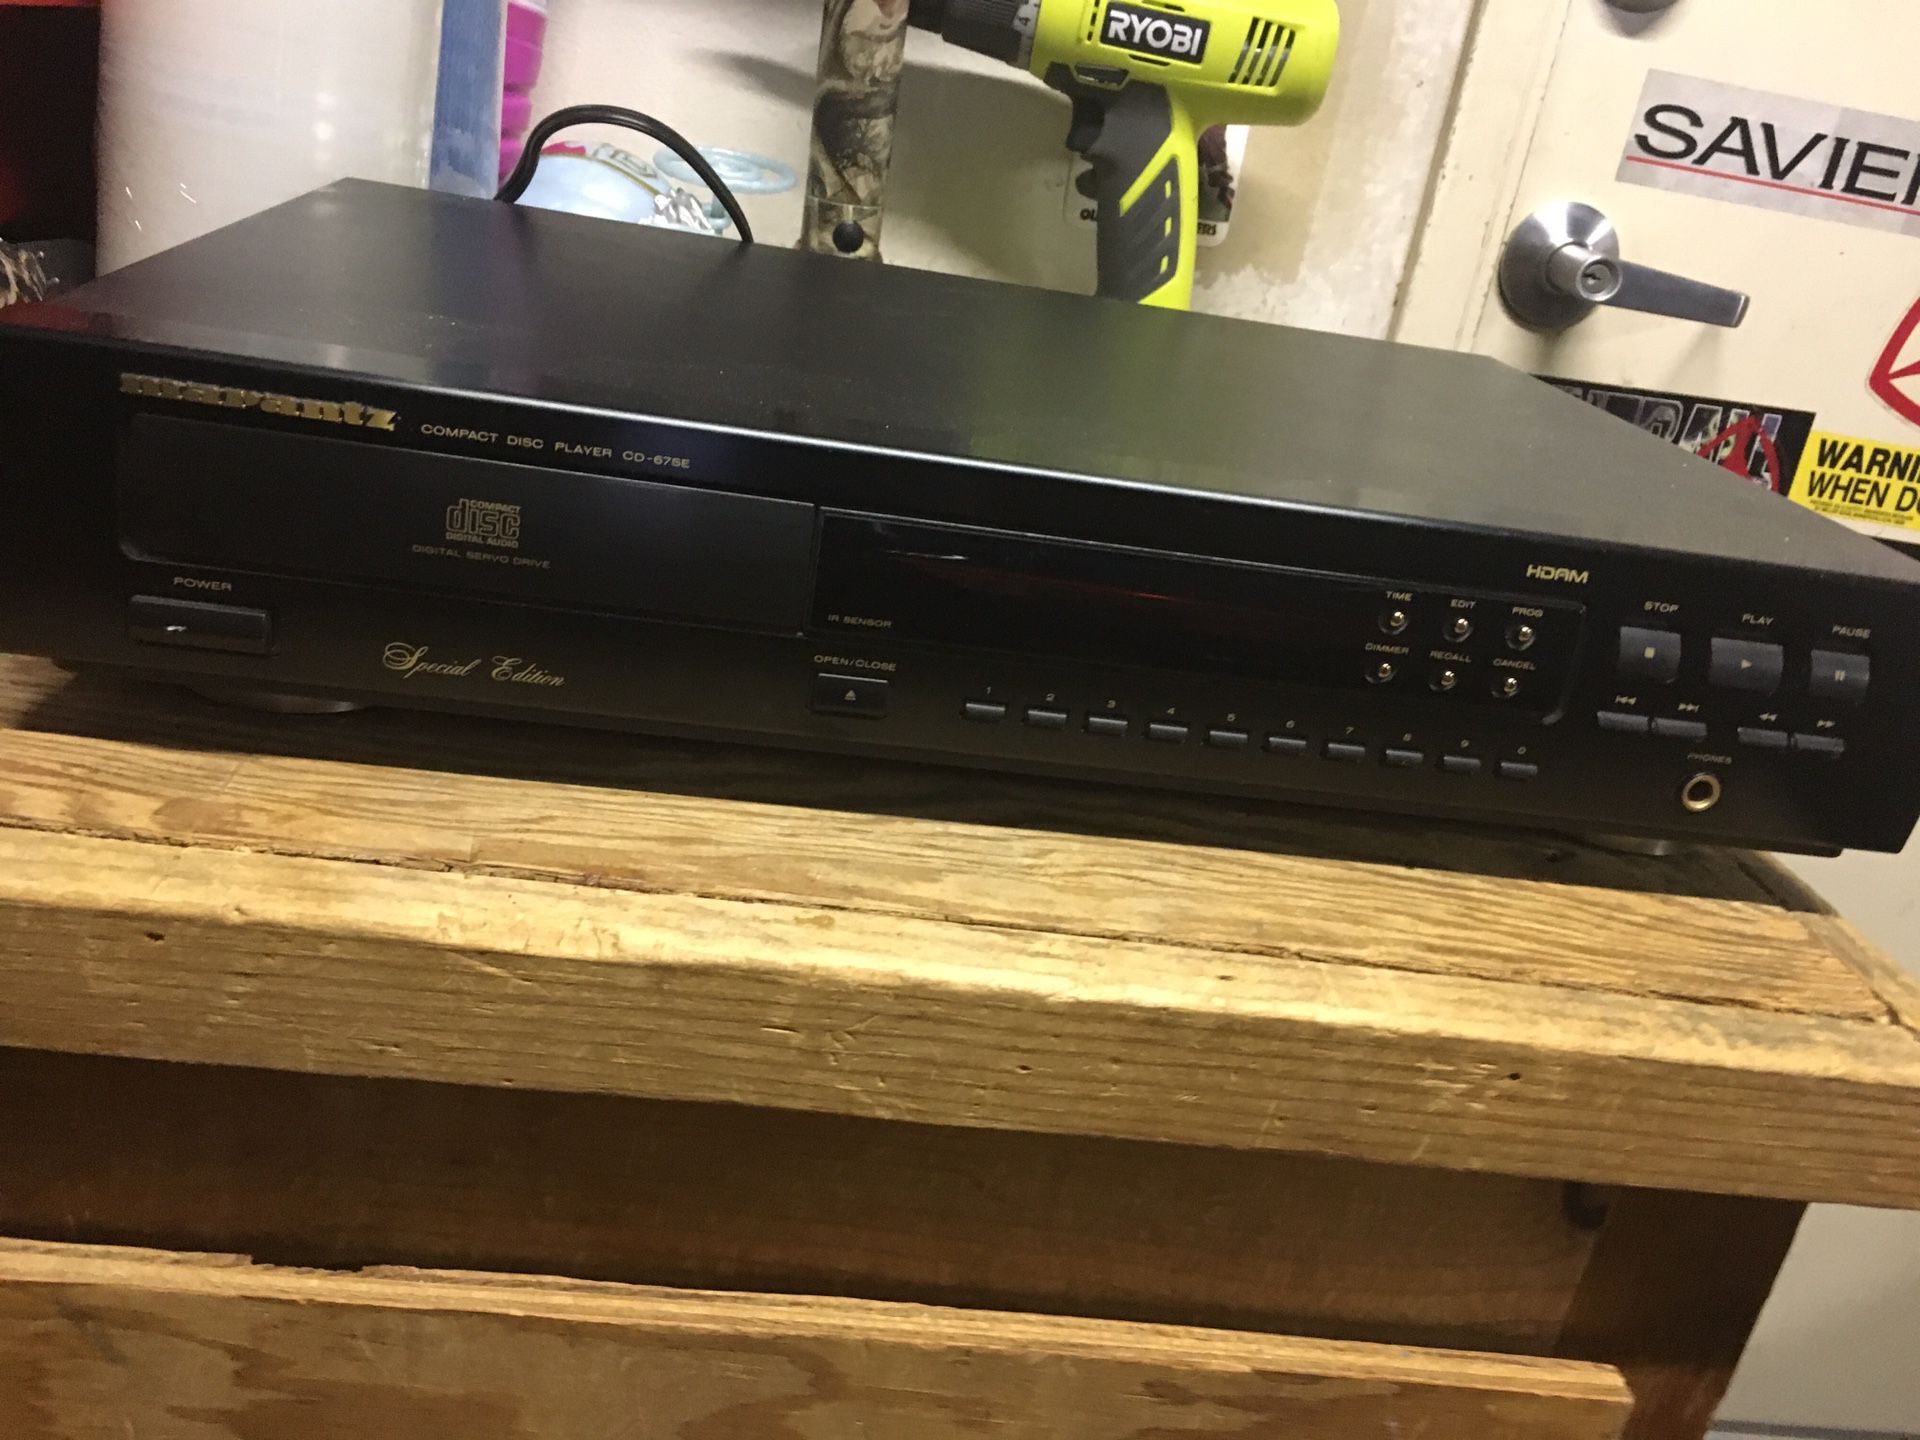 Marantz compact disc cd changer works great with remote control